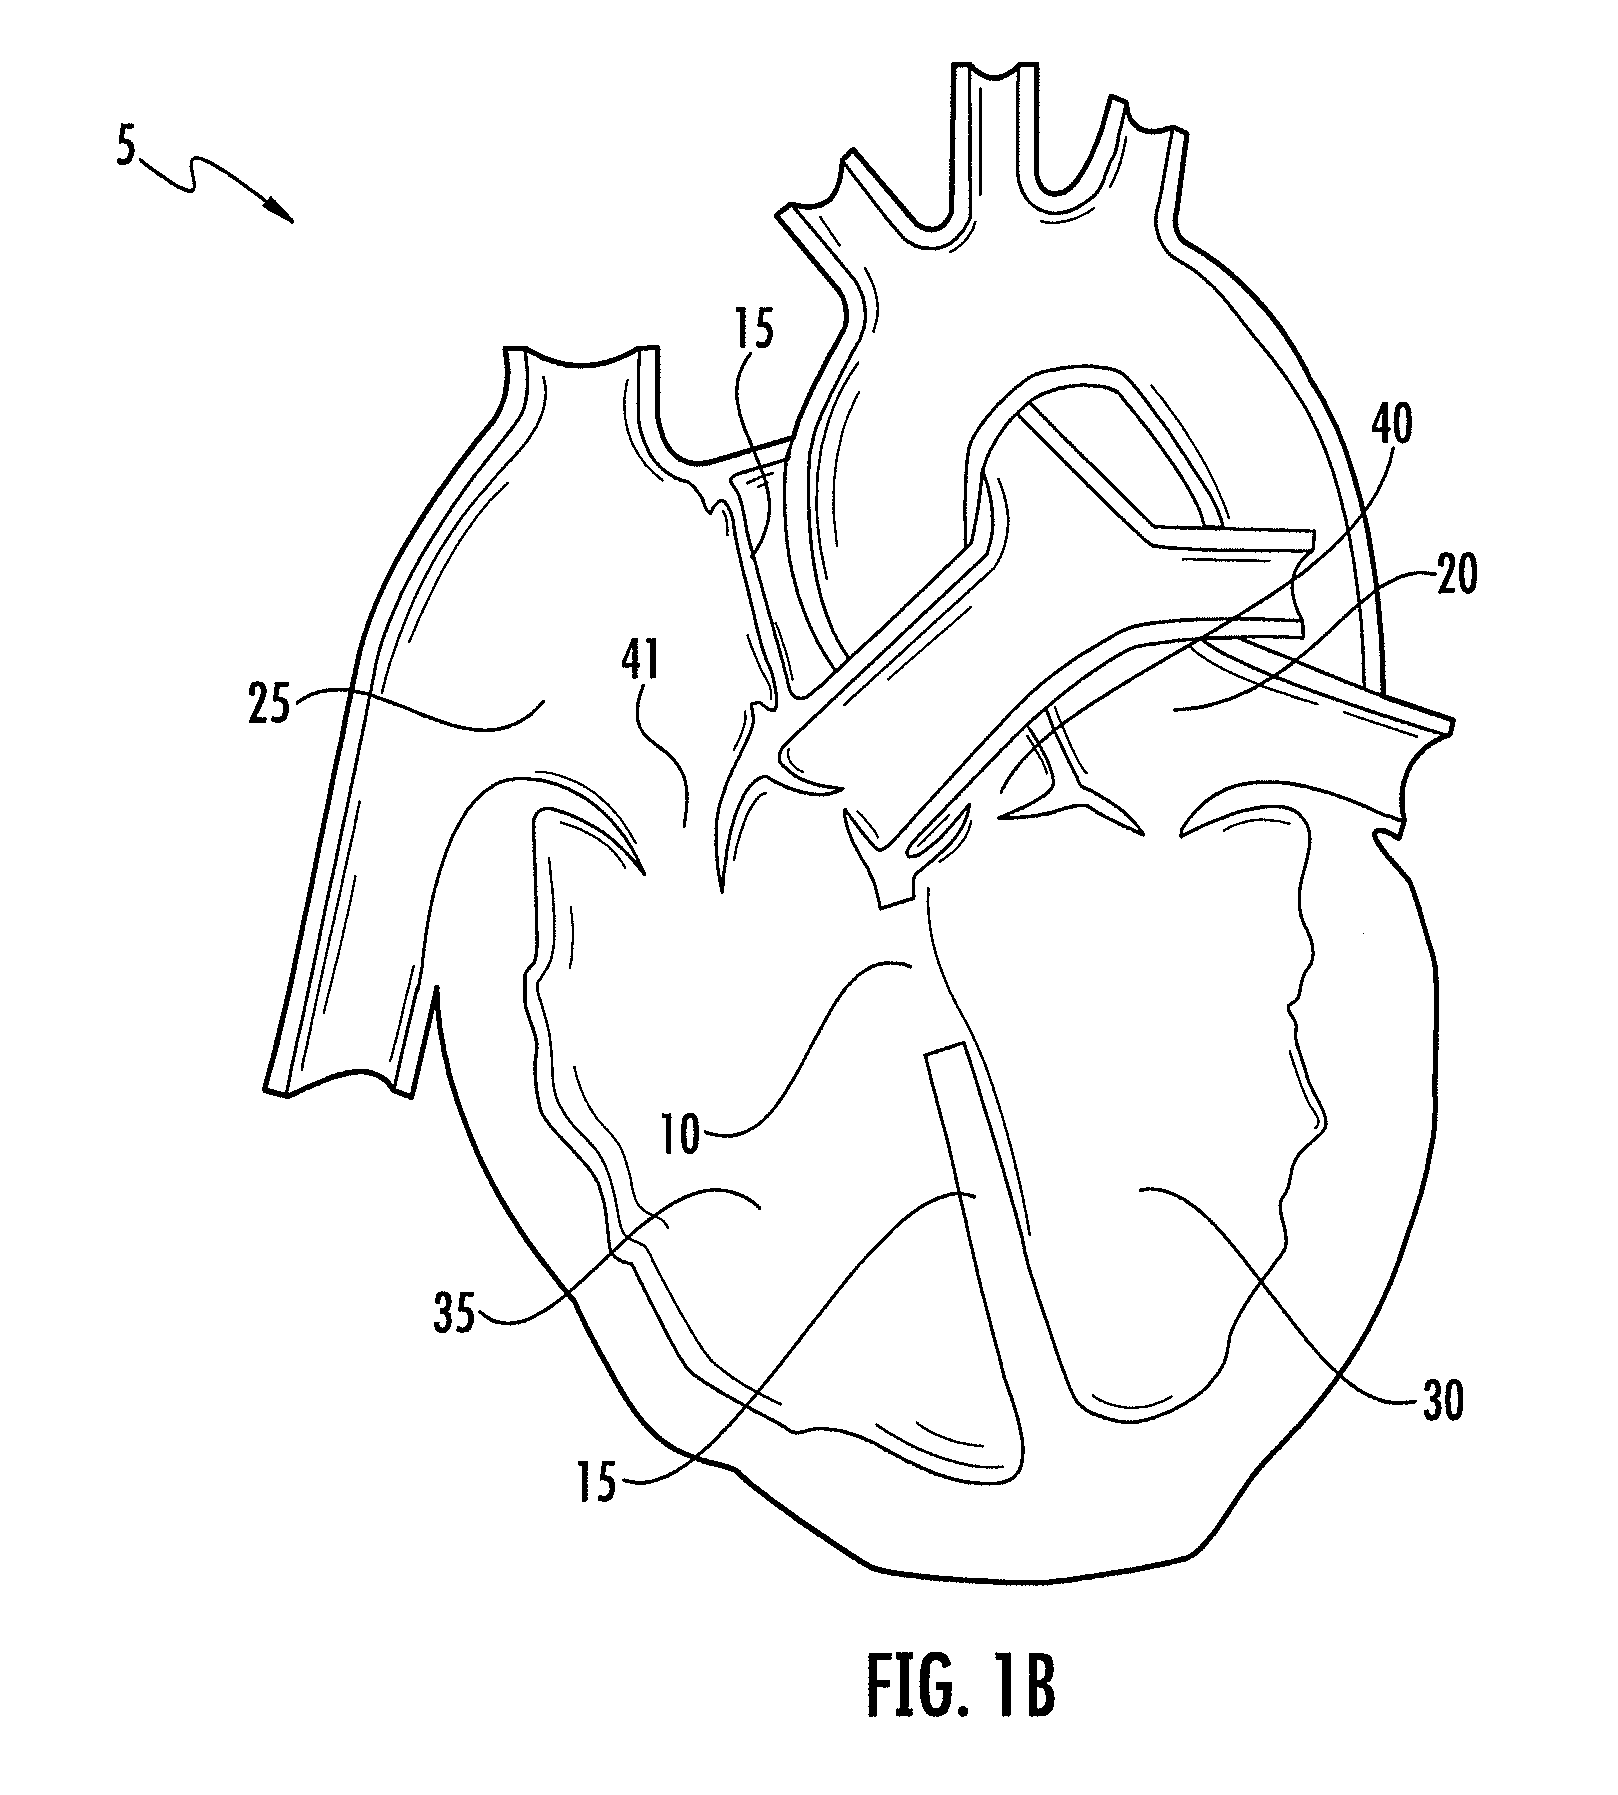 Device and method for occluding a septal defect